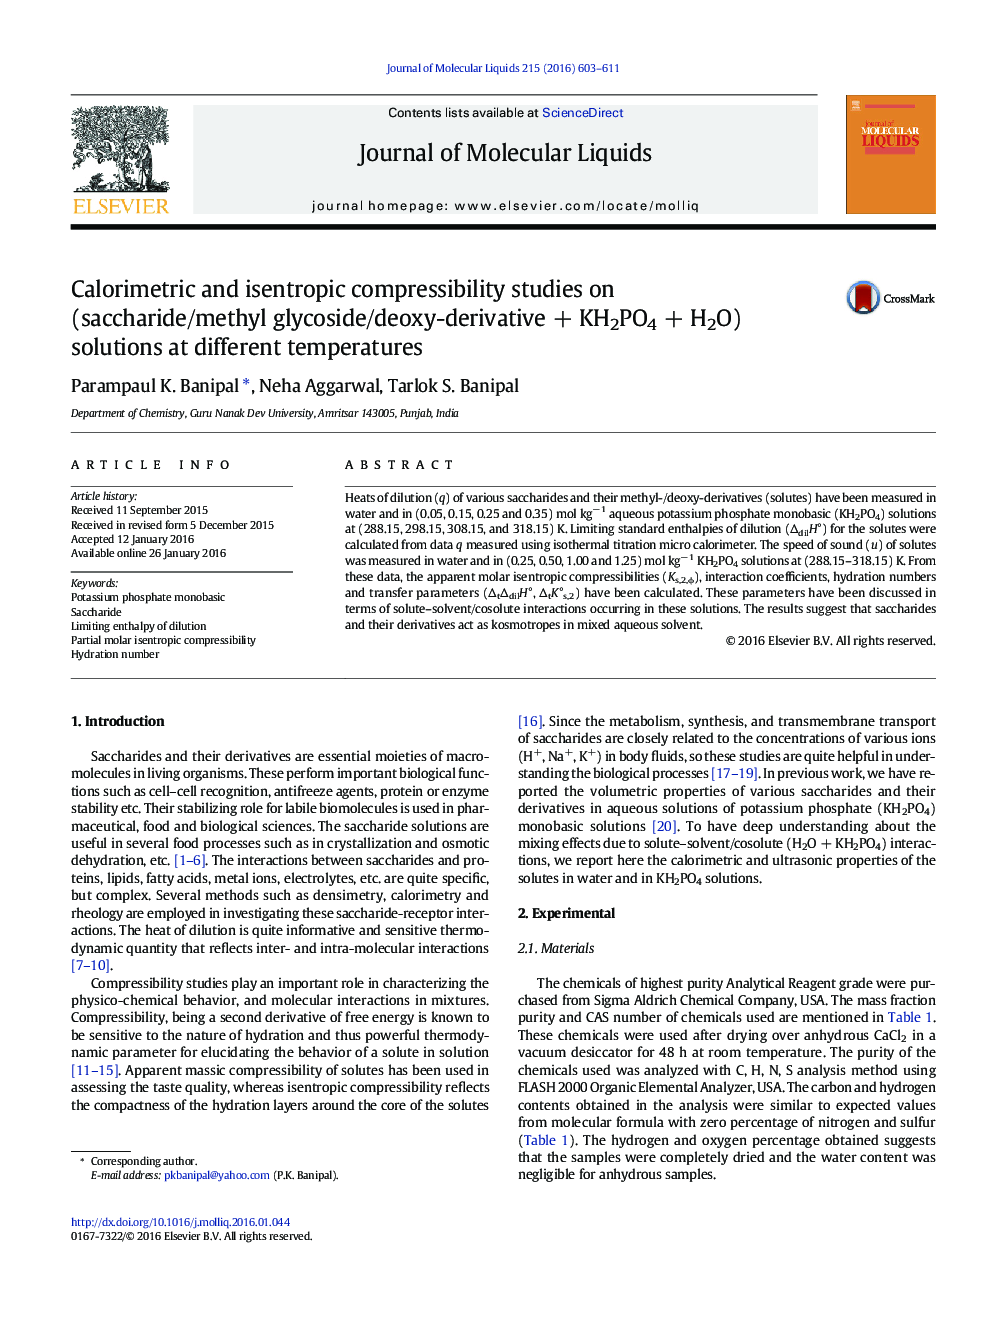 Calorimetric and isentropic compressibility studies on (saccharide/methyl glycoside/deoxy-derivativeÂ +Â KH2PO4Â +Â H2O) solutions at different temperatures